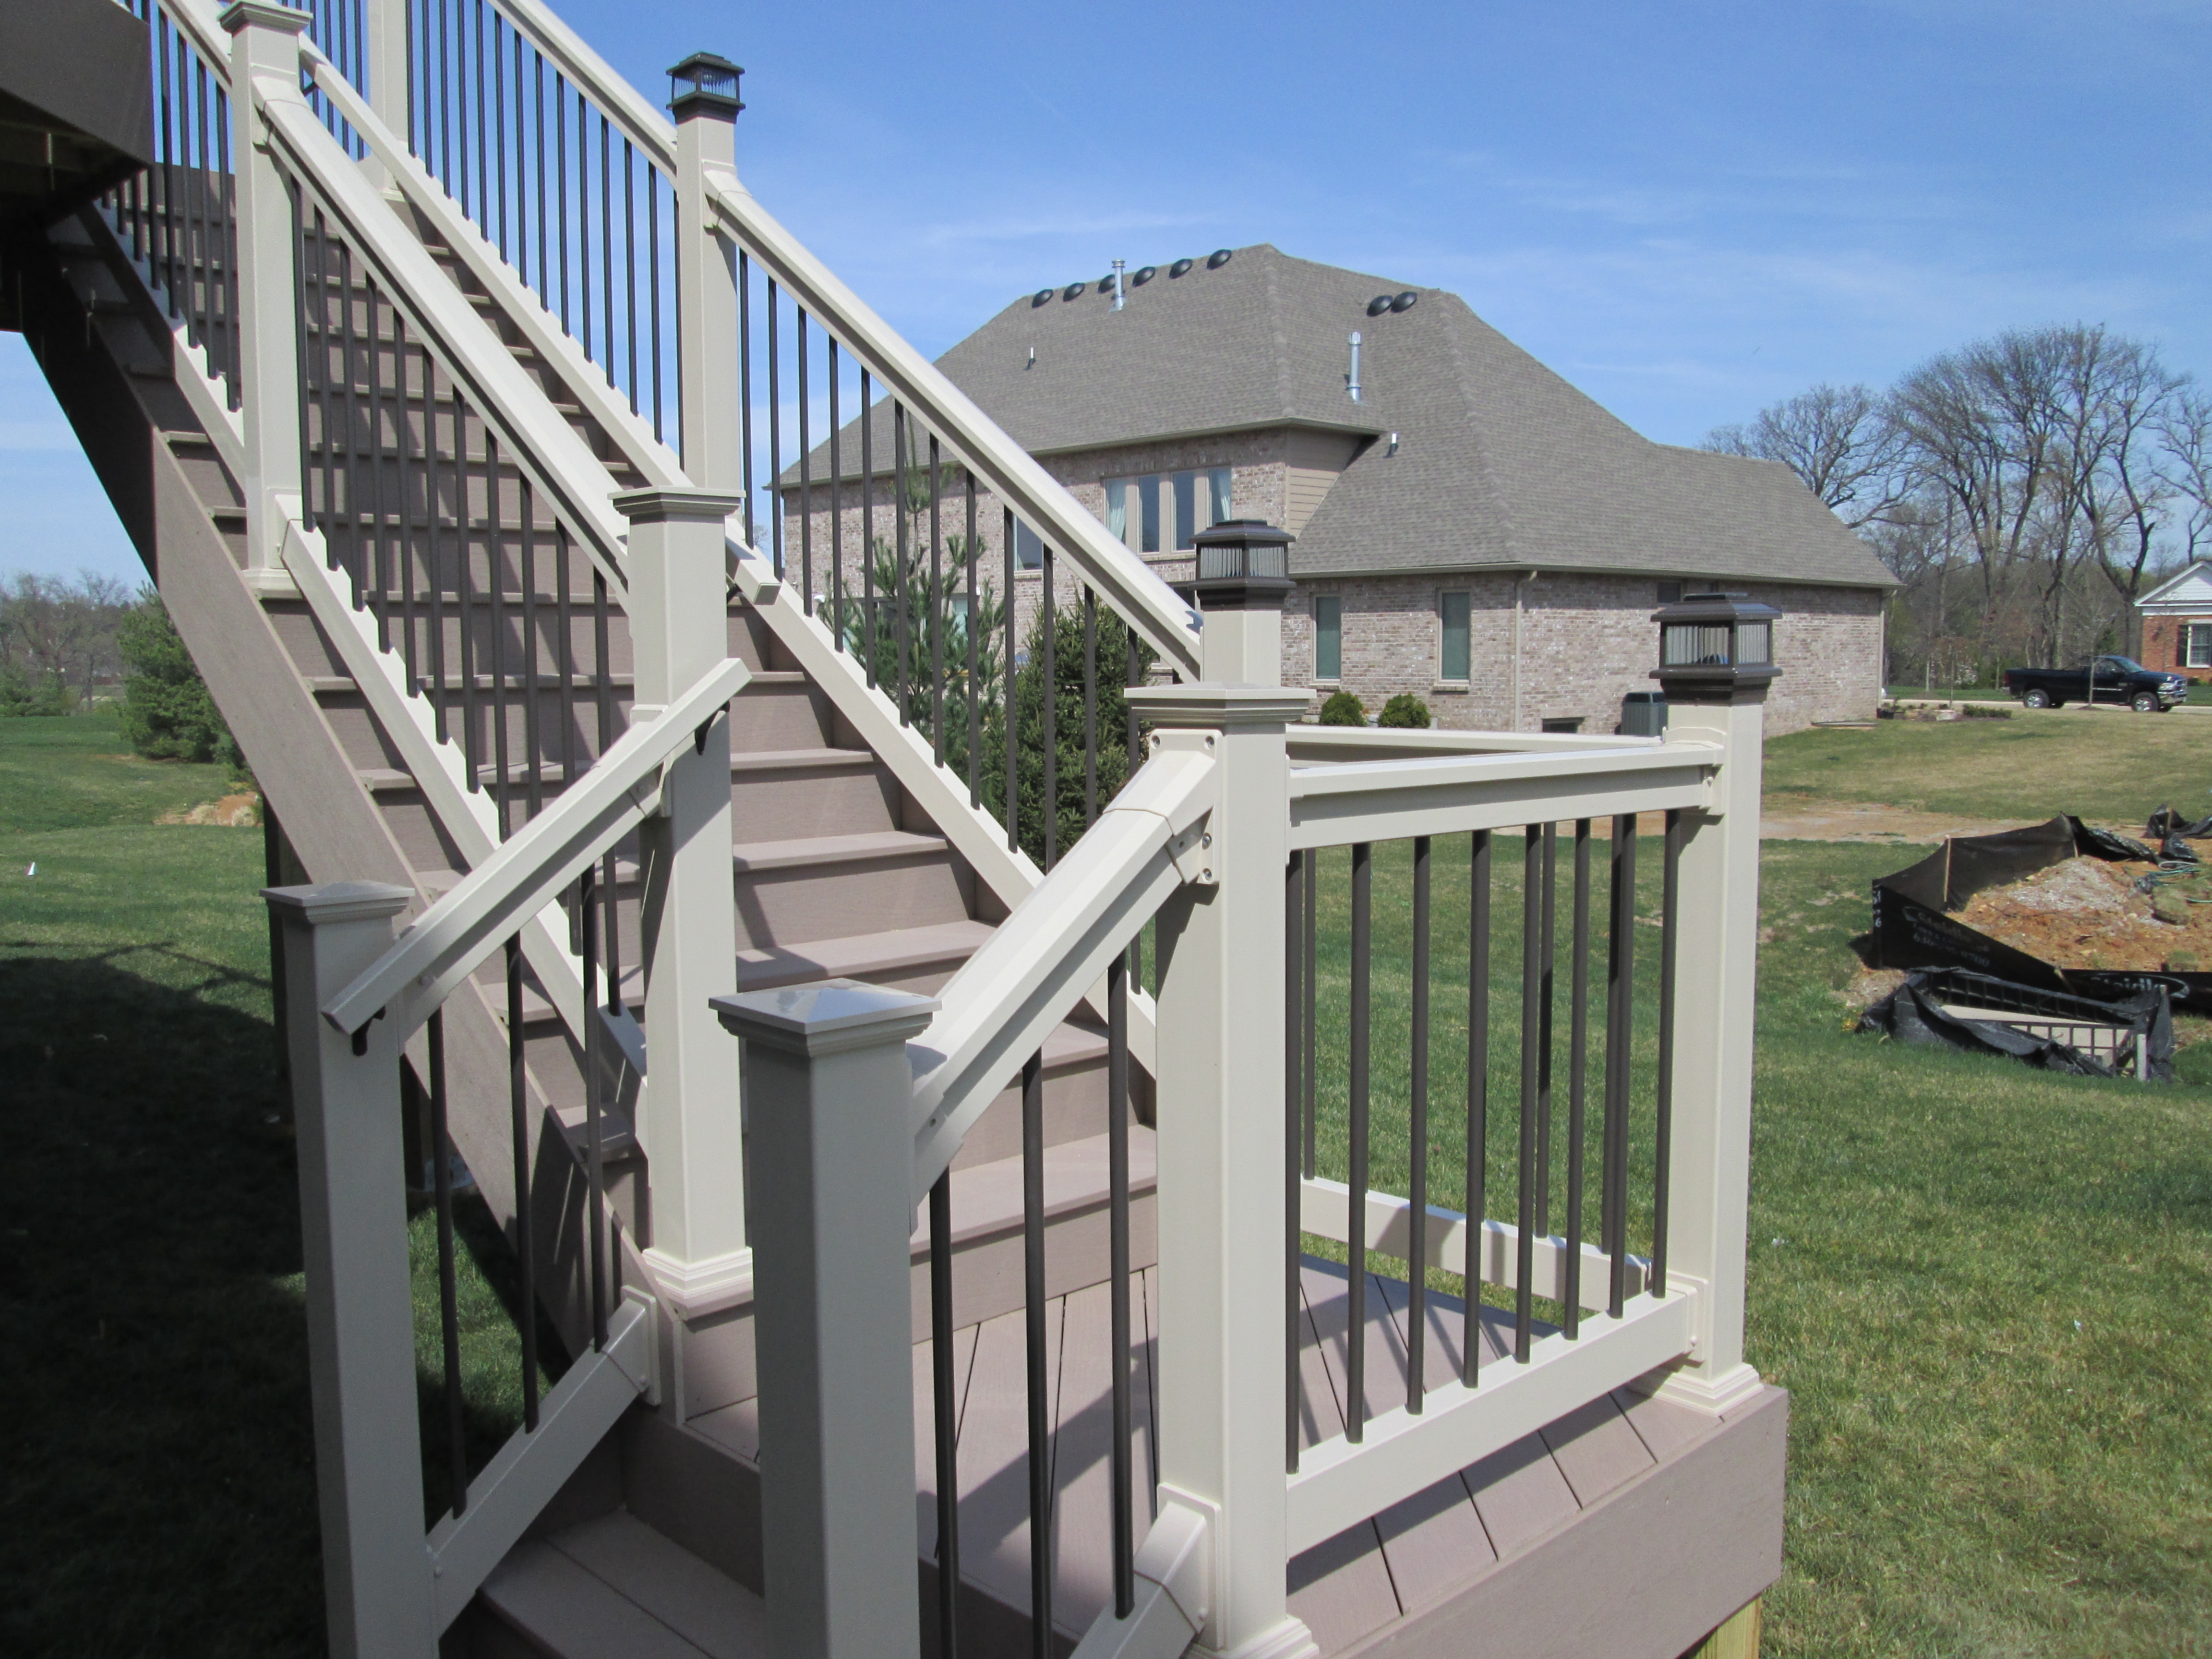 5 Ways To Make Your Deck Better | St. Louis decks, screened porches, pergolas by Archadeck